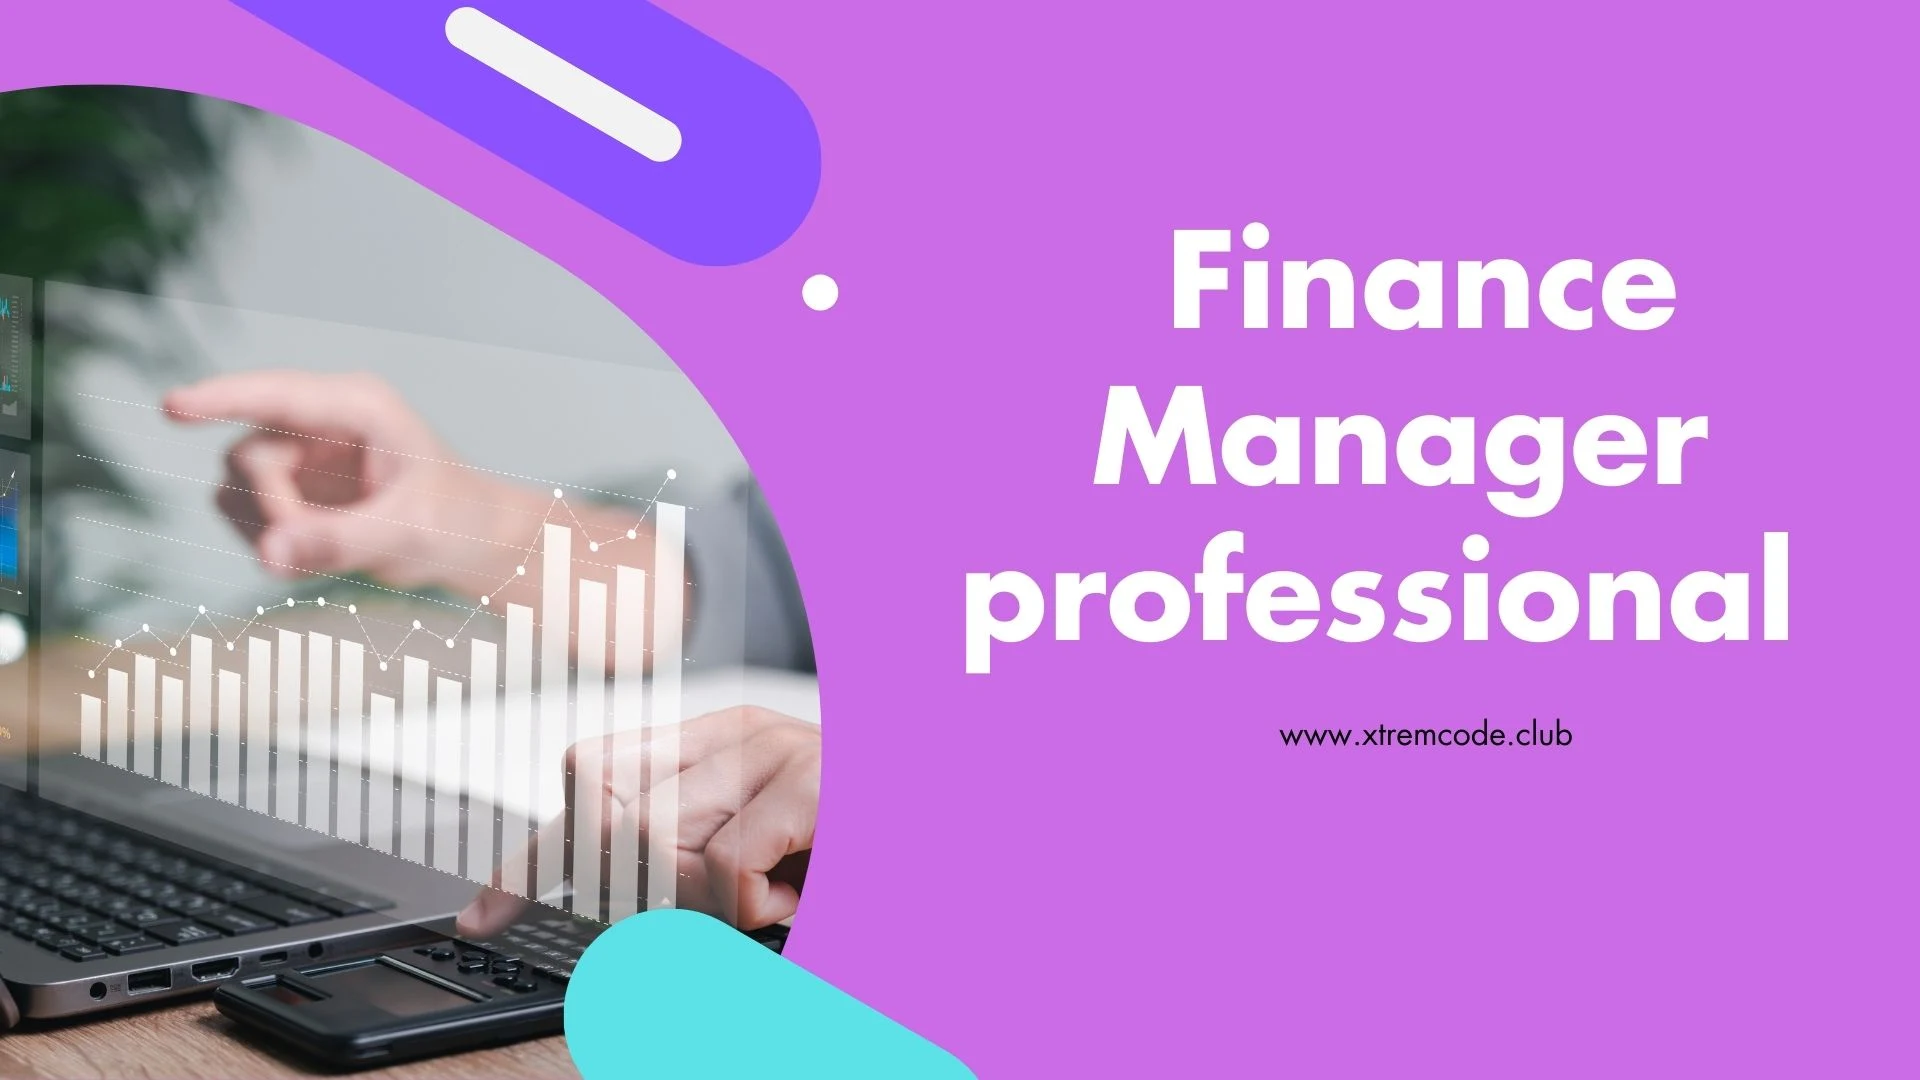 Finance Manager professional